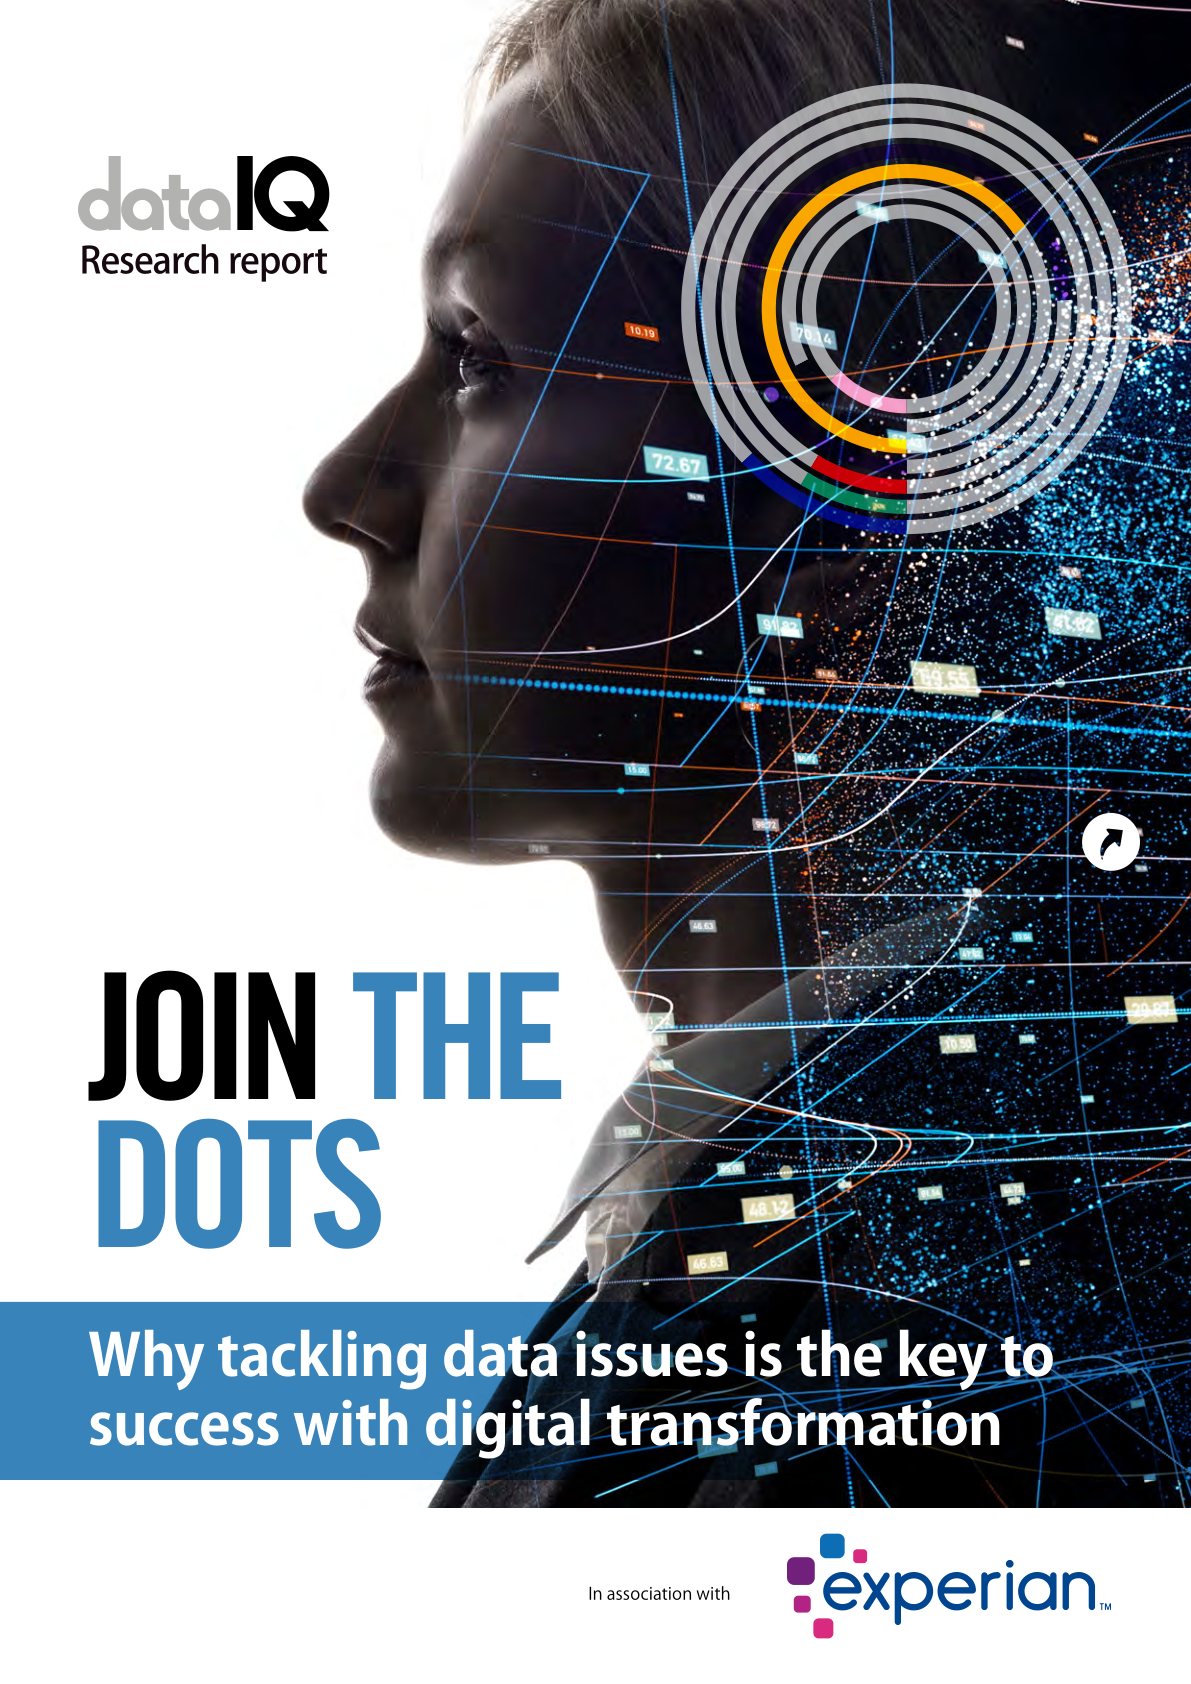 190501 Join the dots Why tackling data issues is key to digital transformation.png